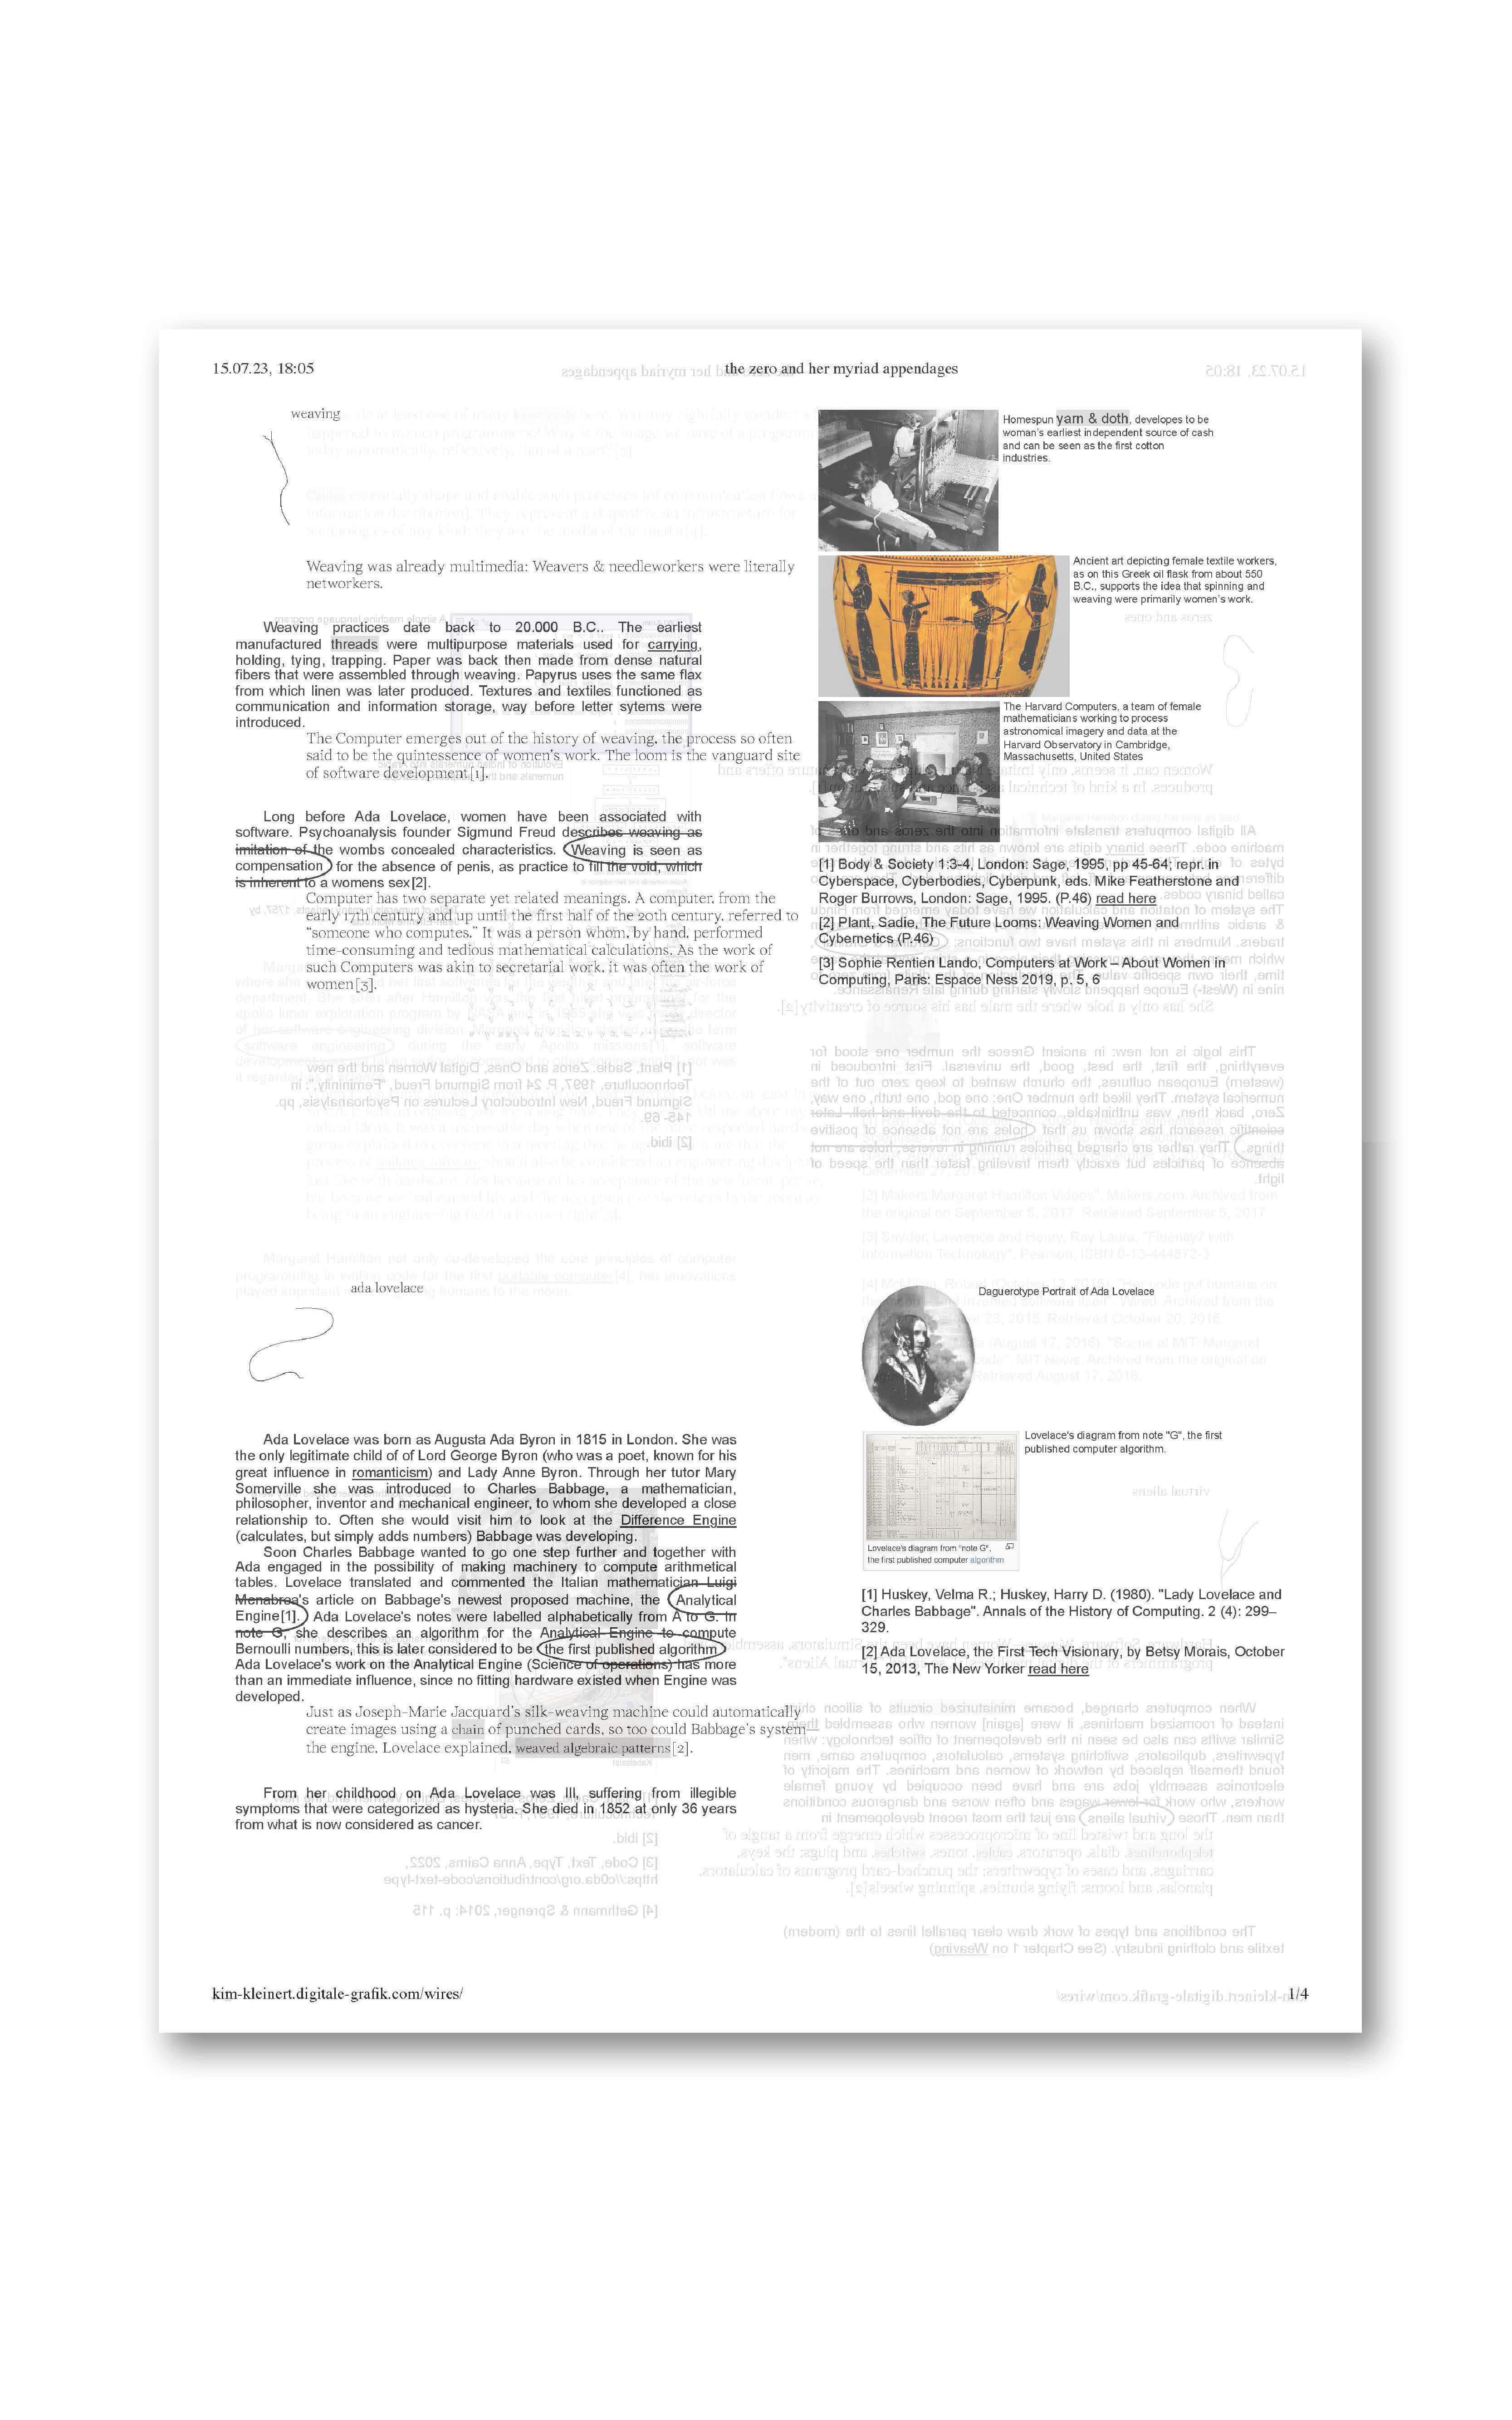 Print on demand publication showing blocks of small text and imahes with subtitles on a white background.